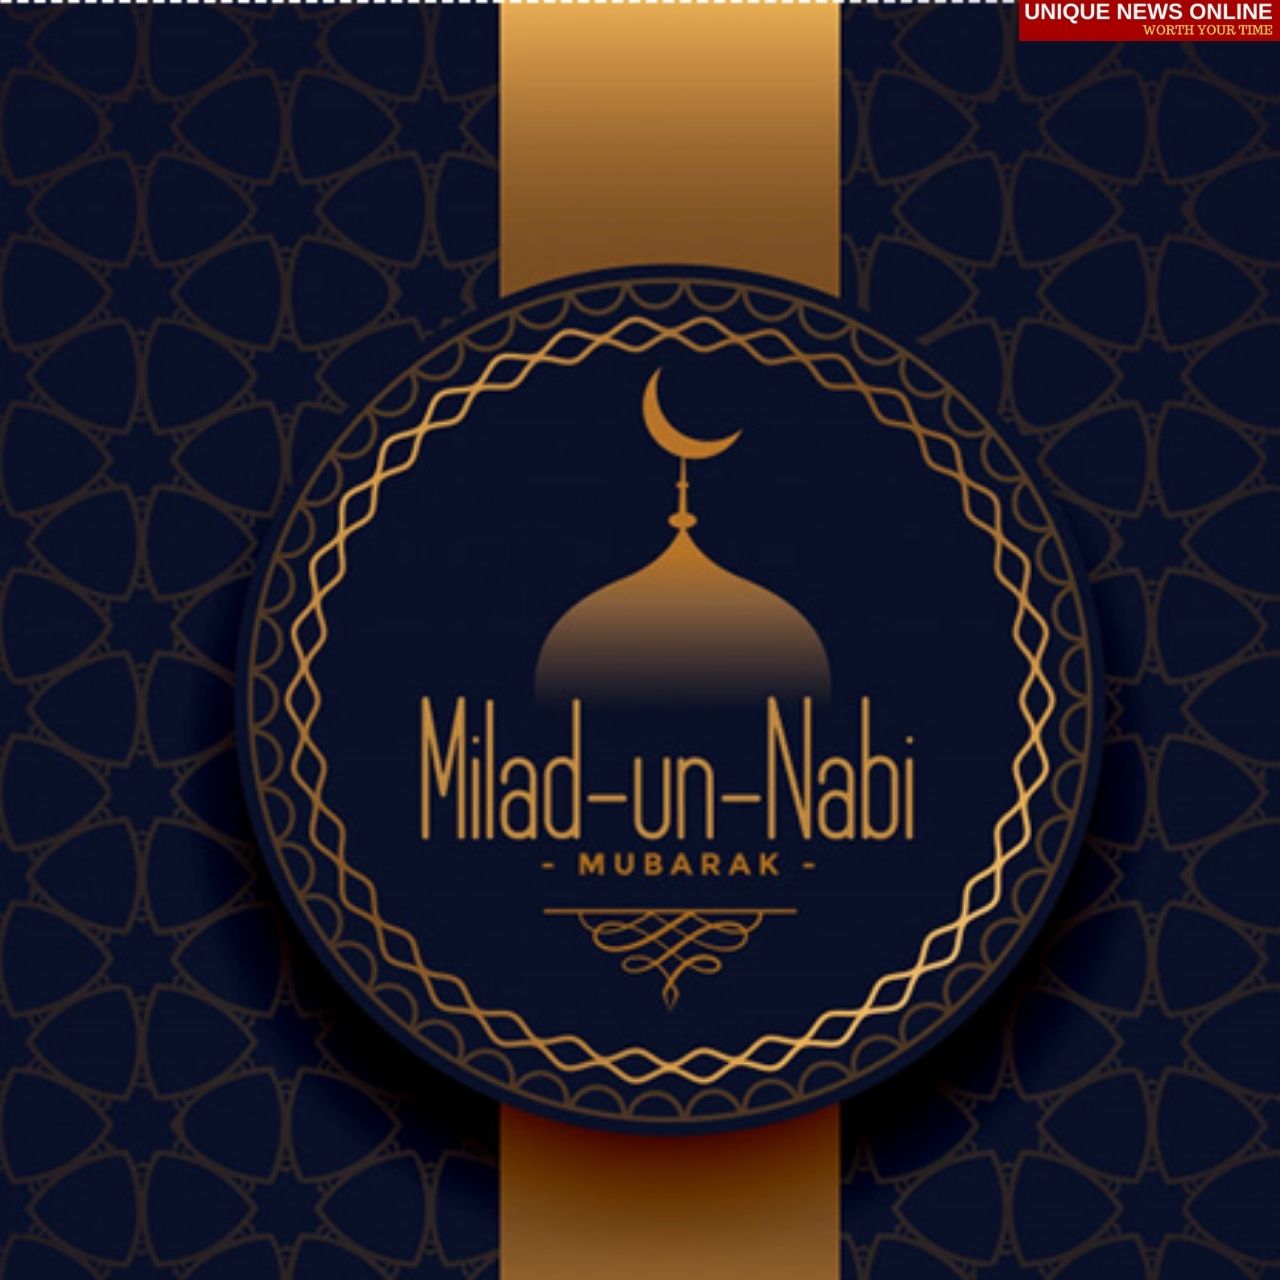 Milad Un-Nabi 2021 Wishes, HD Images, Messages, Greetings, Thoughts, and Quotes to Share